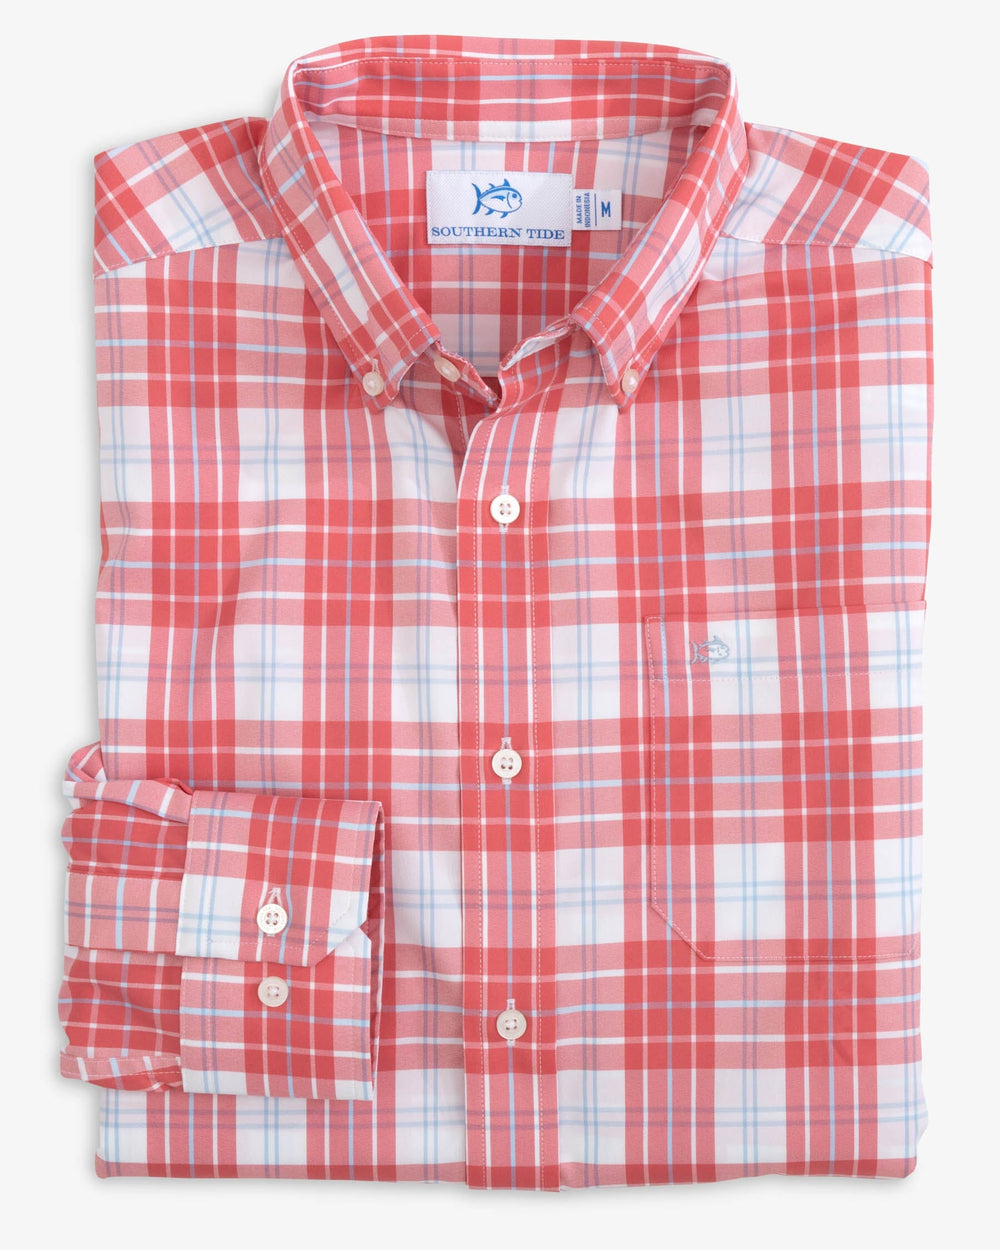 The folded view of the Southern Tide Seaglade Plaid Heather Intercoastal Long Sleeve Button Down Sport Shirt by Southern Tide - Rosewood Red